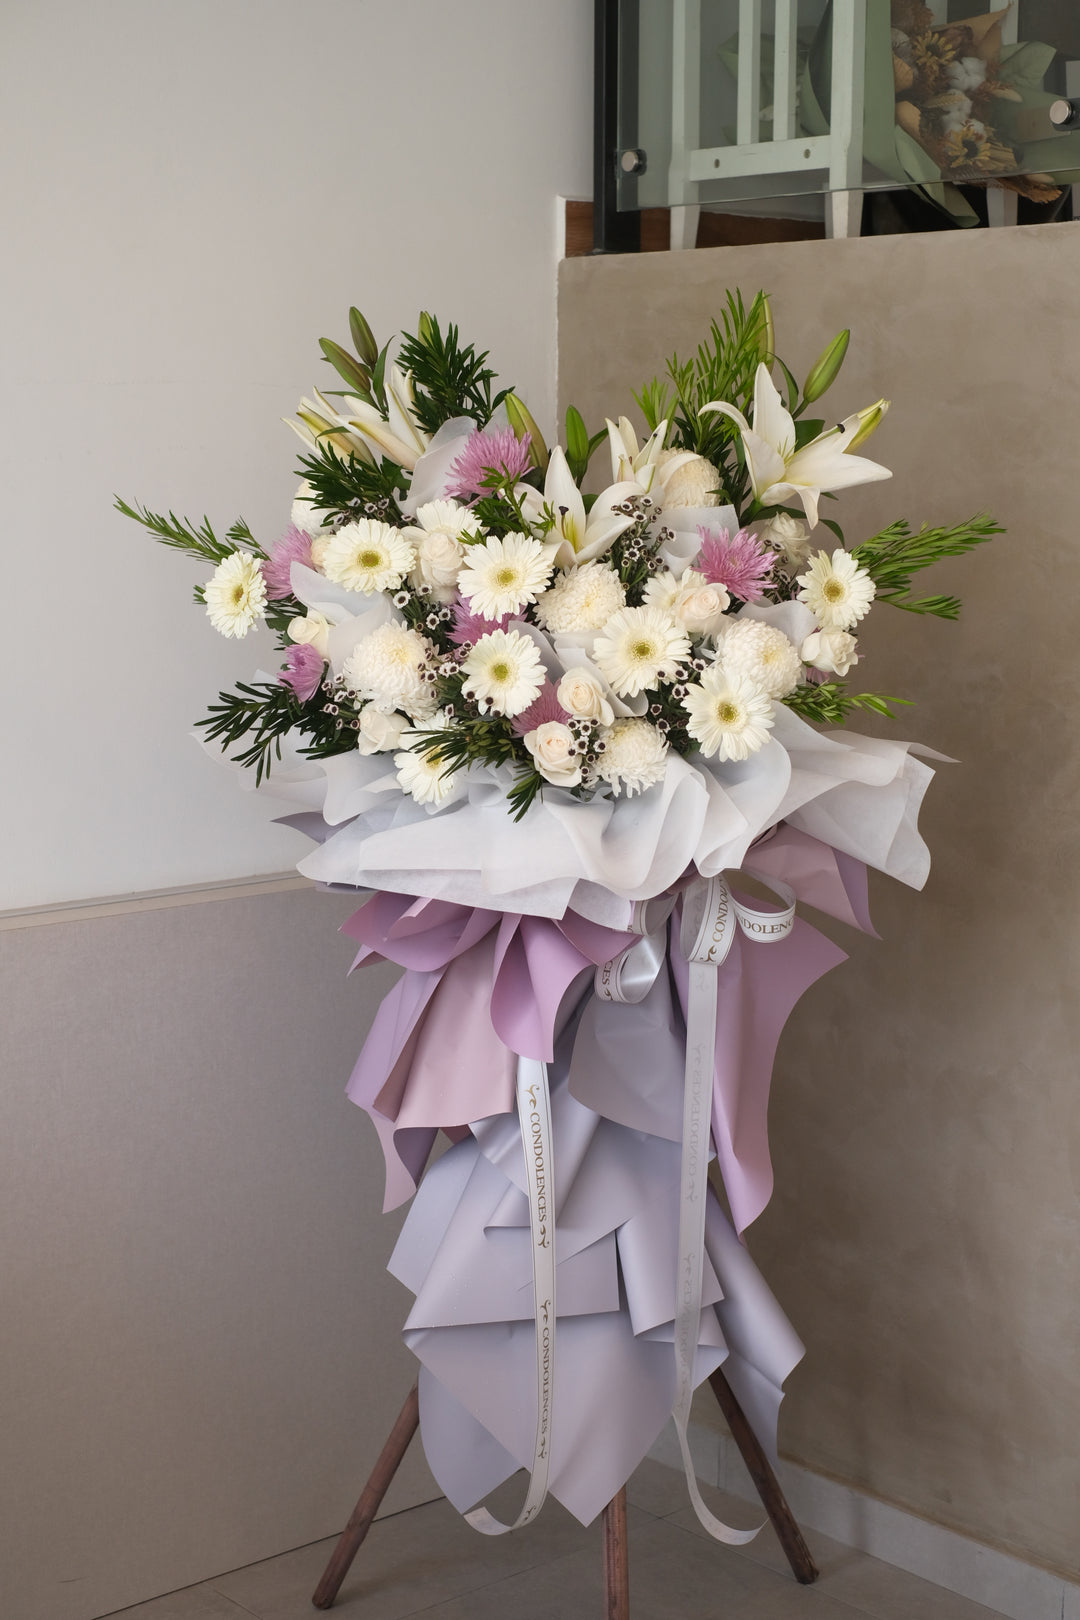 <span>Blessed, peaceful rest is expressed in this condolences stand</span><span>&nbsp;comprises with white rose, white daisies, chrysanthemums, white liles, ping pongs and lush leaves.</span>